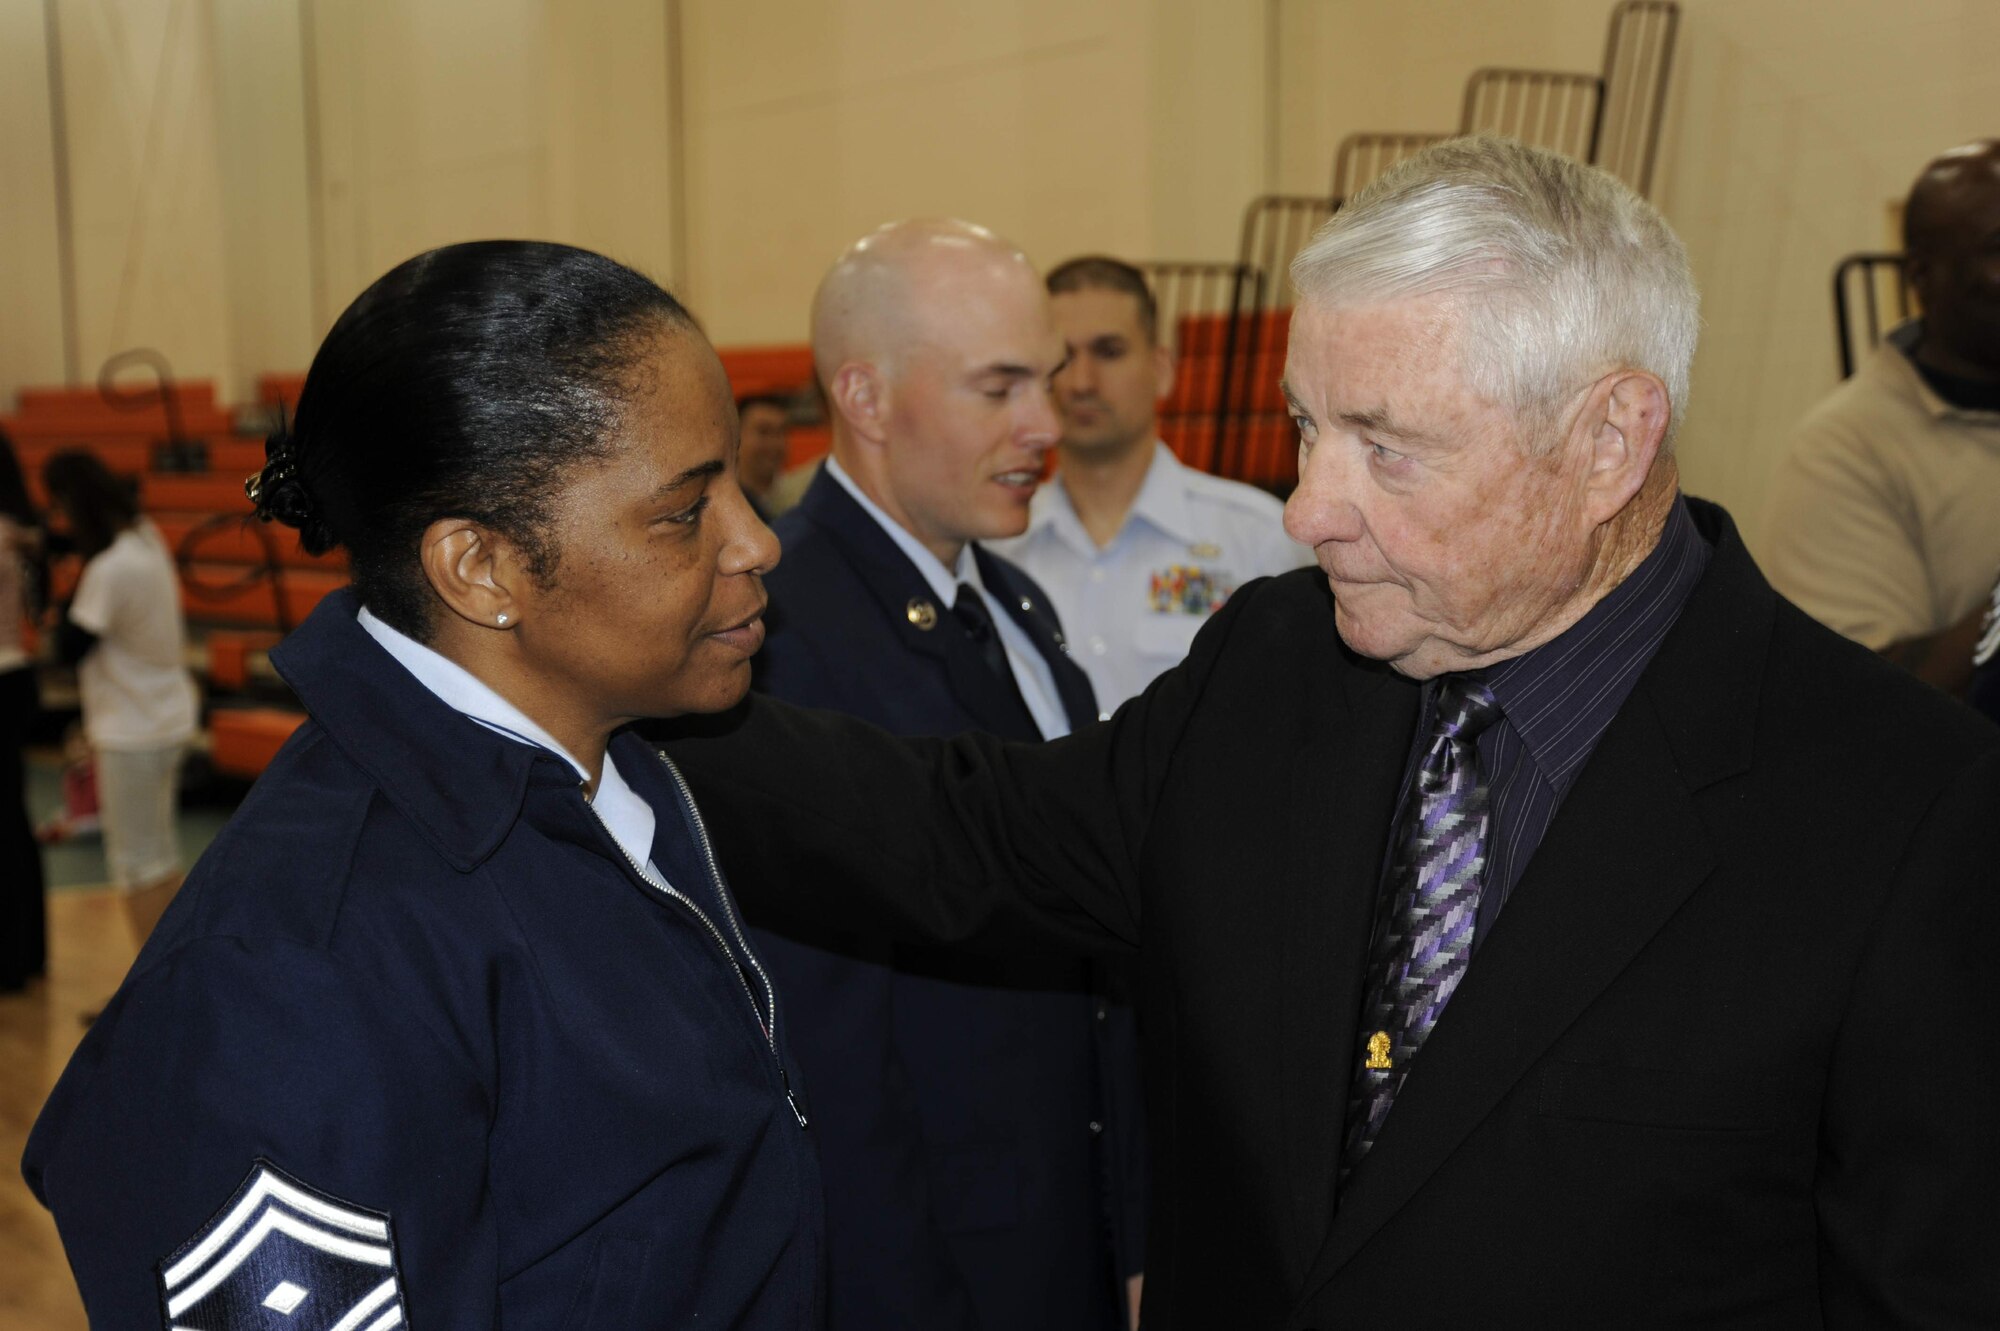 Retired Chief Master Sgt. of the Air Force Robert Gaylor, congratulates Senior Master Sgt. Shelina Fry for receiving a line number for chief master sergeant, after the "Honoring America's veterans" ceremony April 20.  The ceremony was part of Hampton Roads Air Force Week.  Sergeant Fry is the first sergeant for the 1st Equipment Maintenance Squadron at Langley Air Force Base, Va. (U.S. Air Force photo/Tech. Sgt. Matthew McGovern)